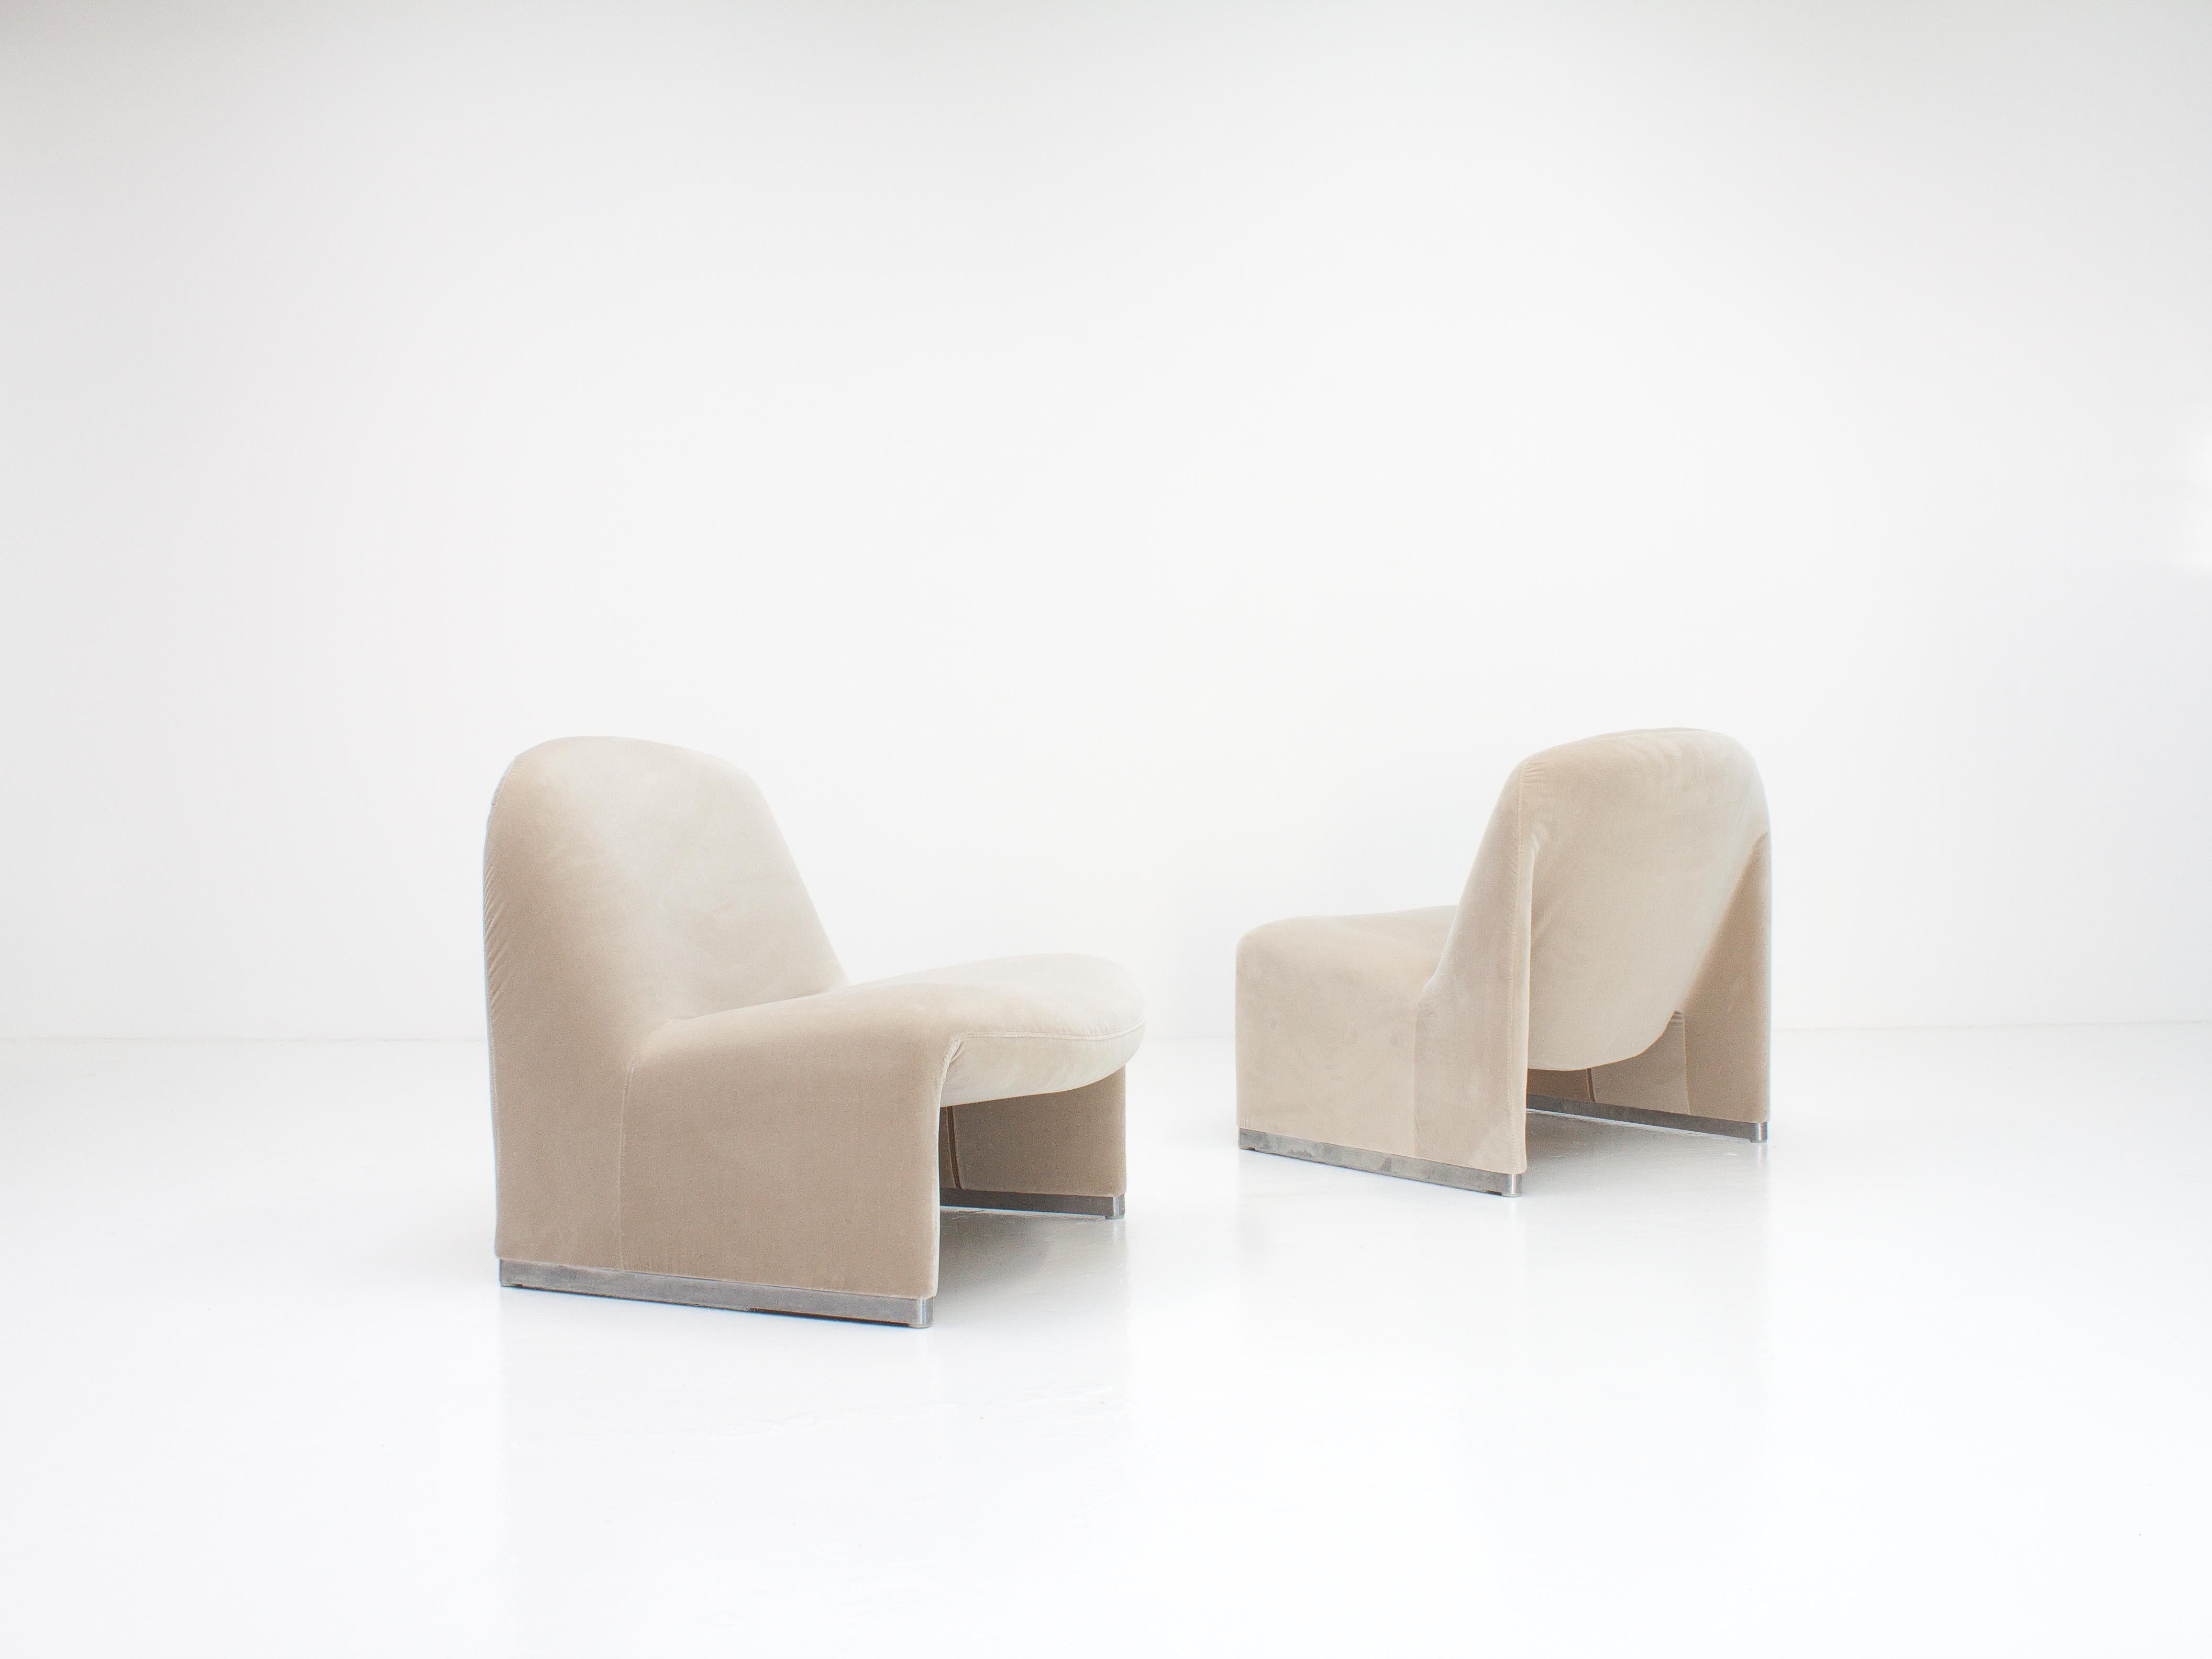 A pair of Giancarlo Piretti “Alky” chairs newly upholstered in designers guild linen colored velvet. 

Manufactured by Artifort in the 1970s.

The organic shape offers a minimal appearance but also comfort.

Foam restored where required and